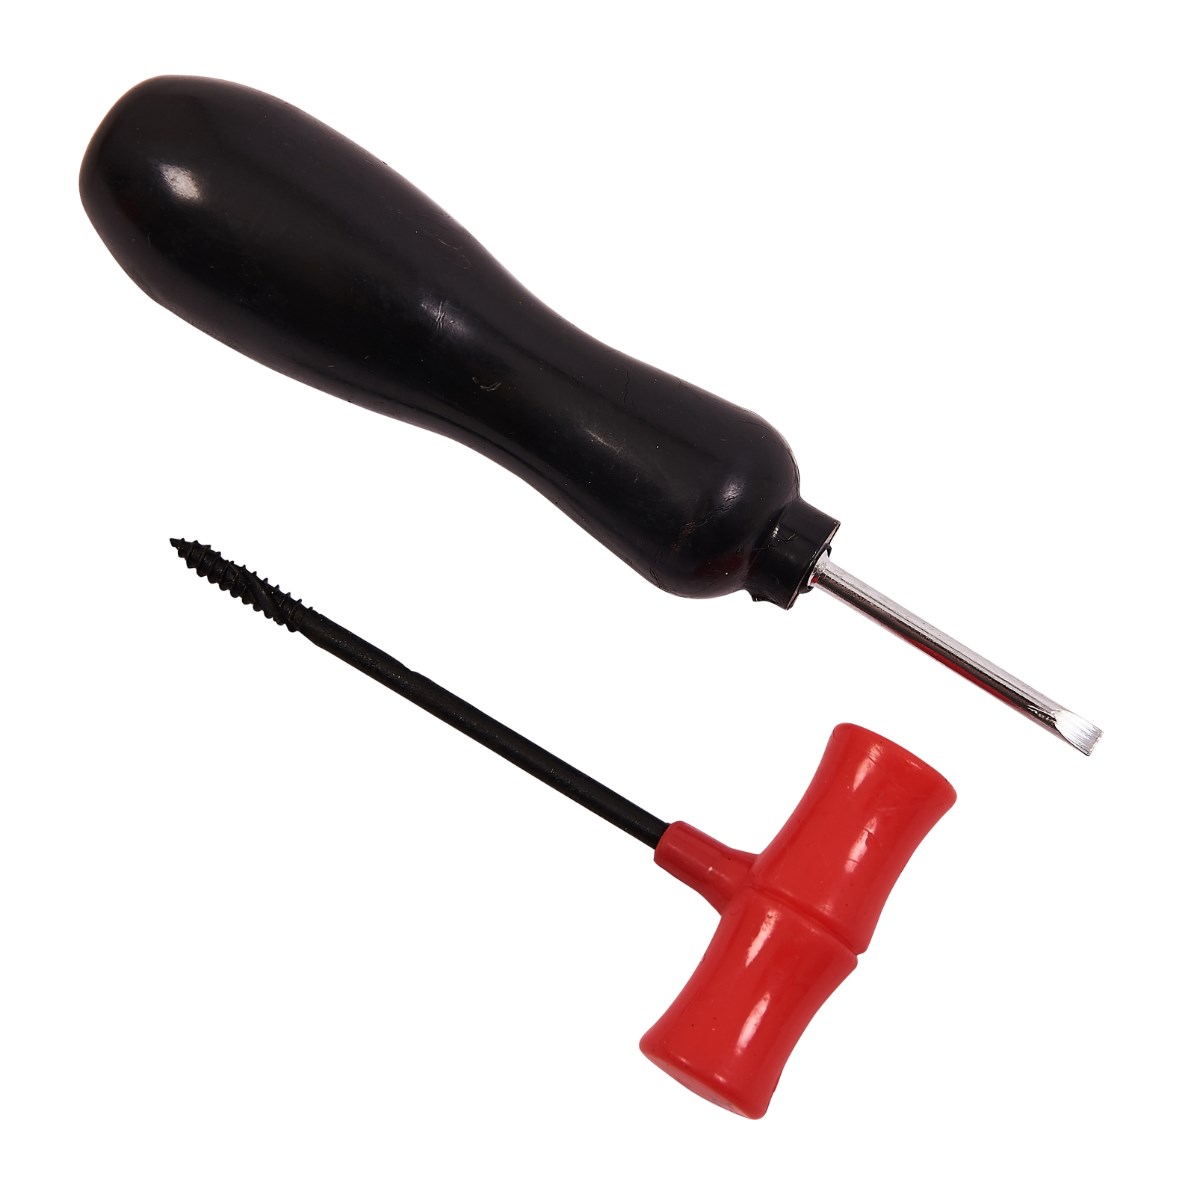 BEST Am Tech S2550 Bradawl And Gimlet Set 2pc Have A Fantastic Range Of Ess GIF 